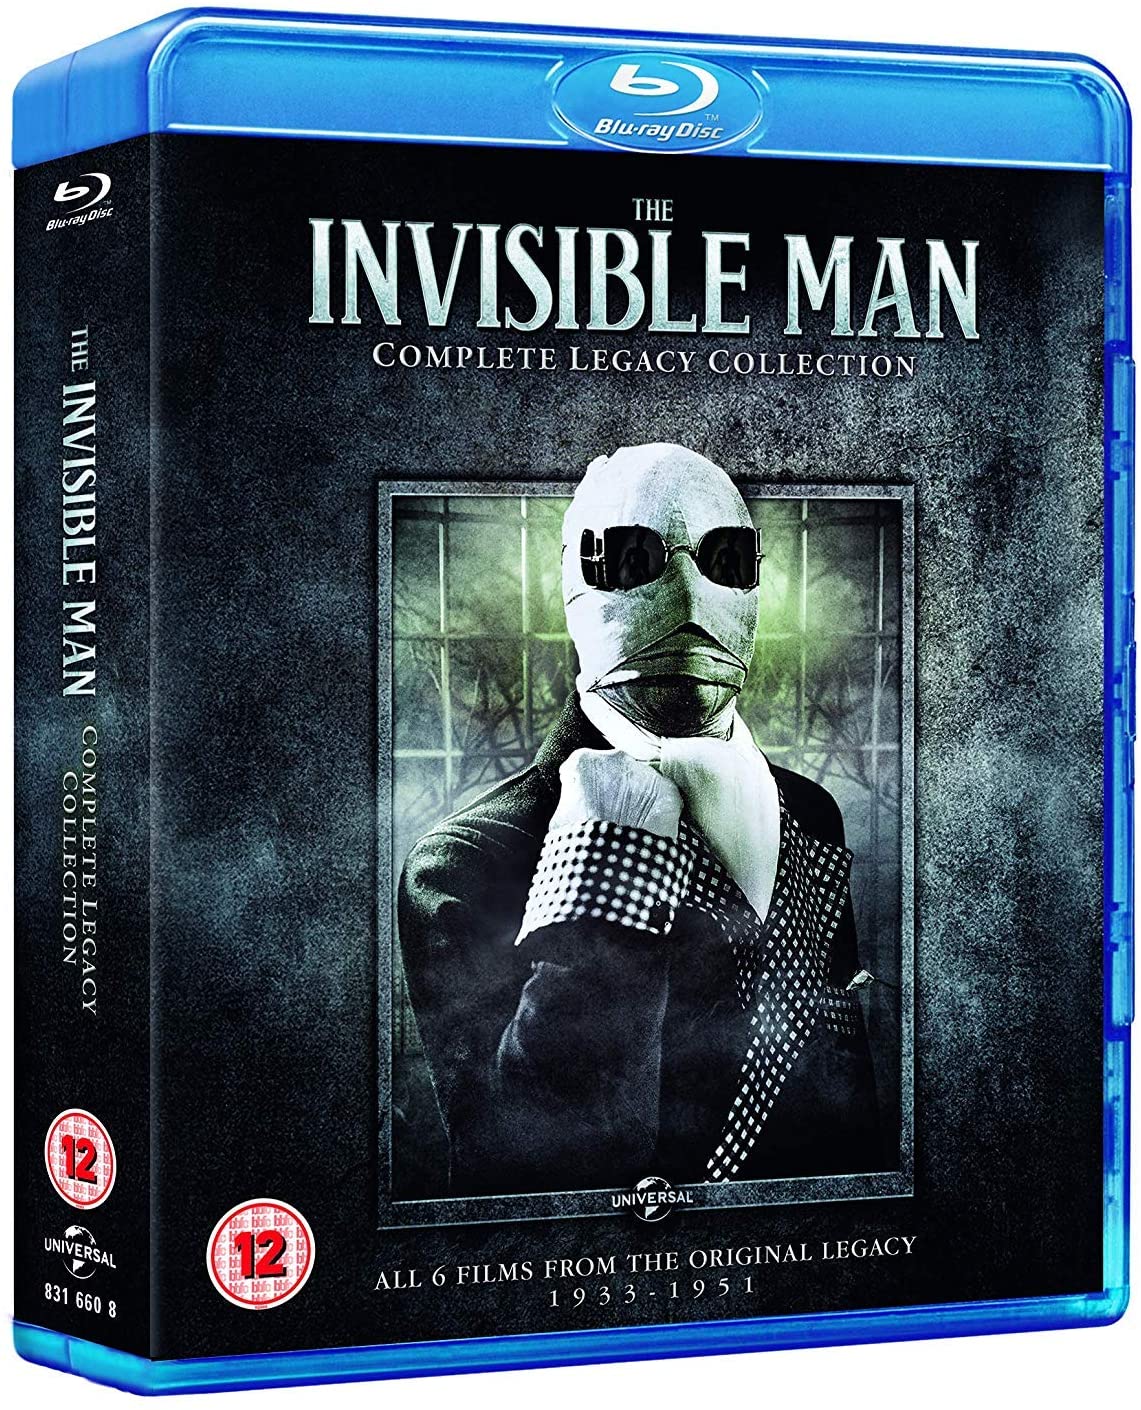 The Invisible Man: Complete Legacy Collection (Blu-ray)